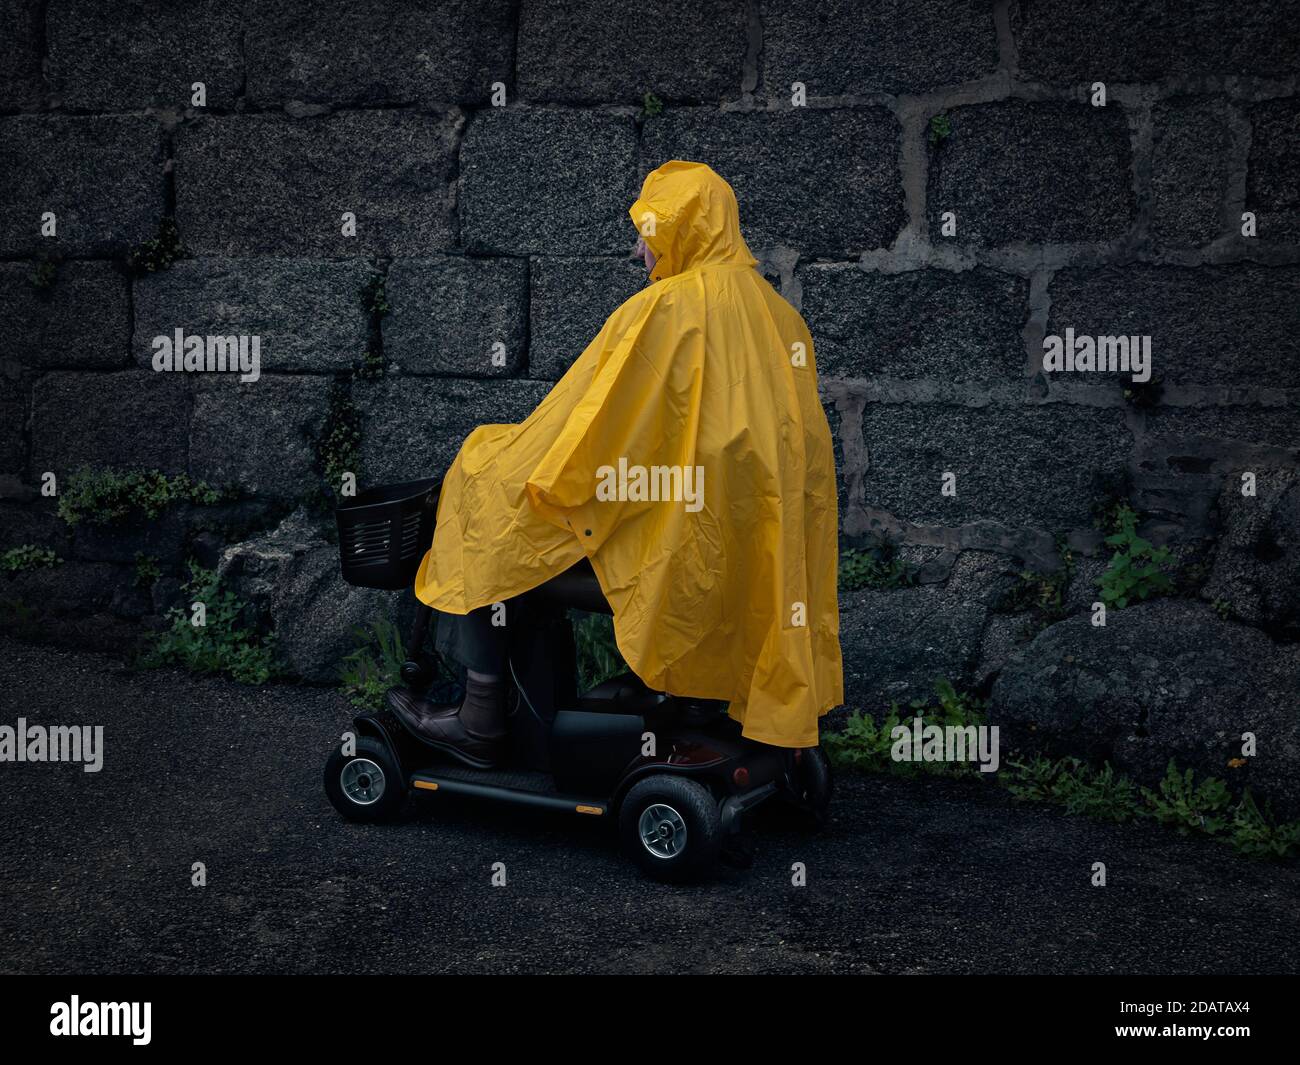 Man on a Mobility Scooter / Vehicle wearing a Yellow Raincoat / Poncho / Cagoule / Jacket, in profile with Old Grey Stone Wall Background Stock Photo